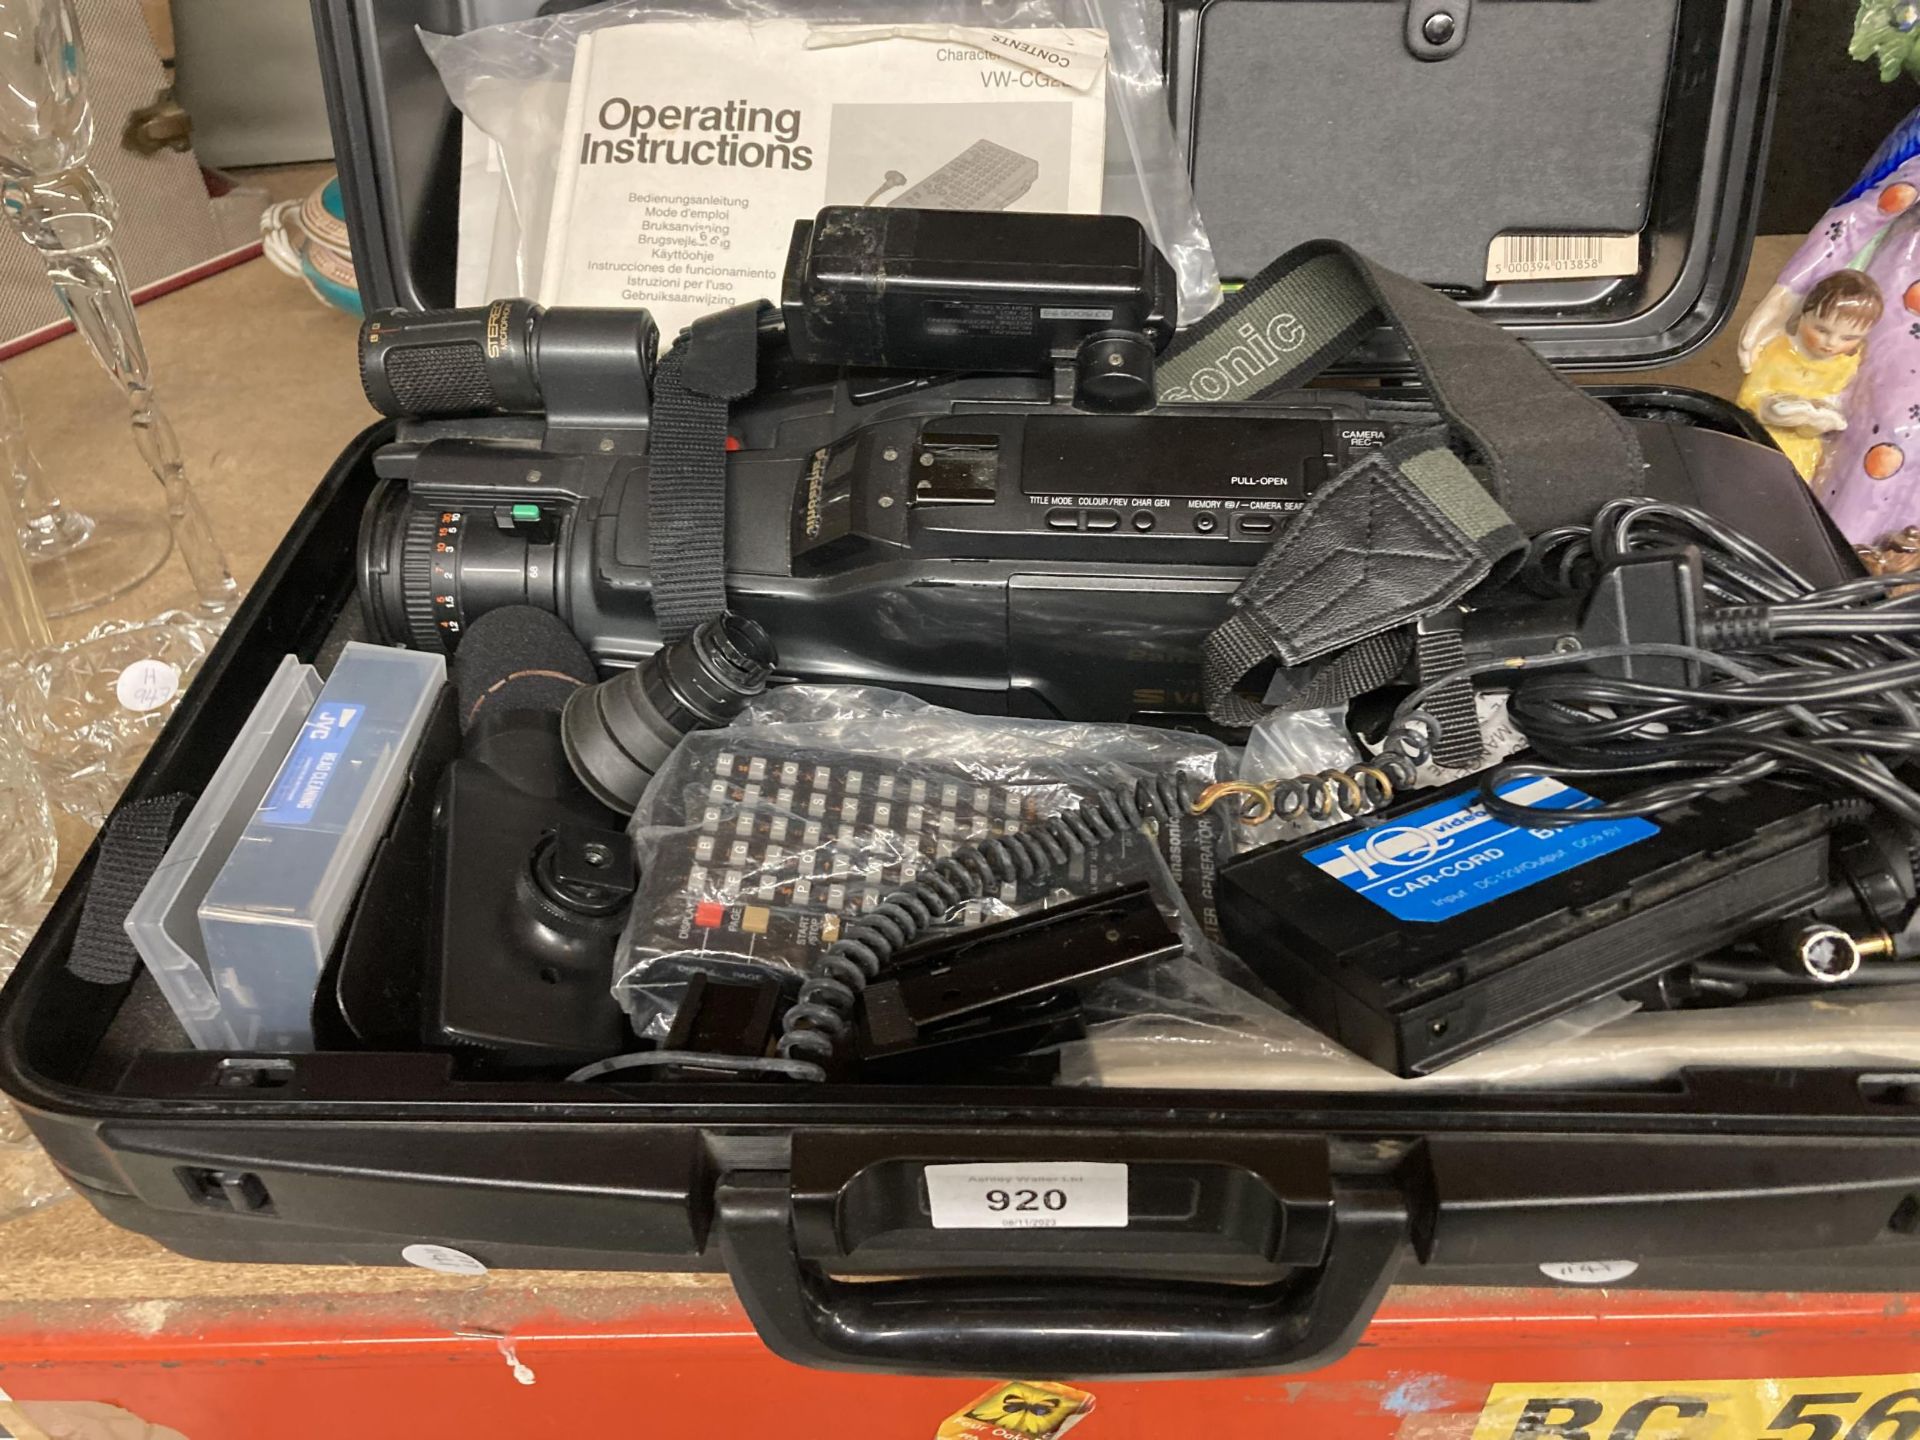 A PANASONIC MS90 VHS VIDEO CAMERA PLUS ACCESSORIES IN A CASE - Image 3 of 3